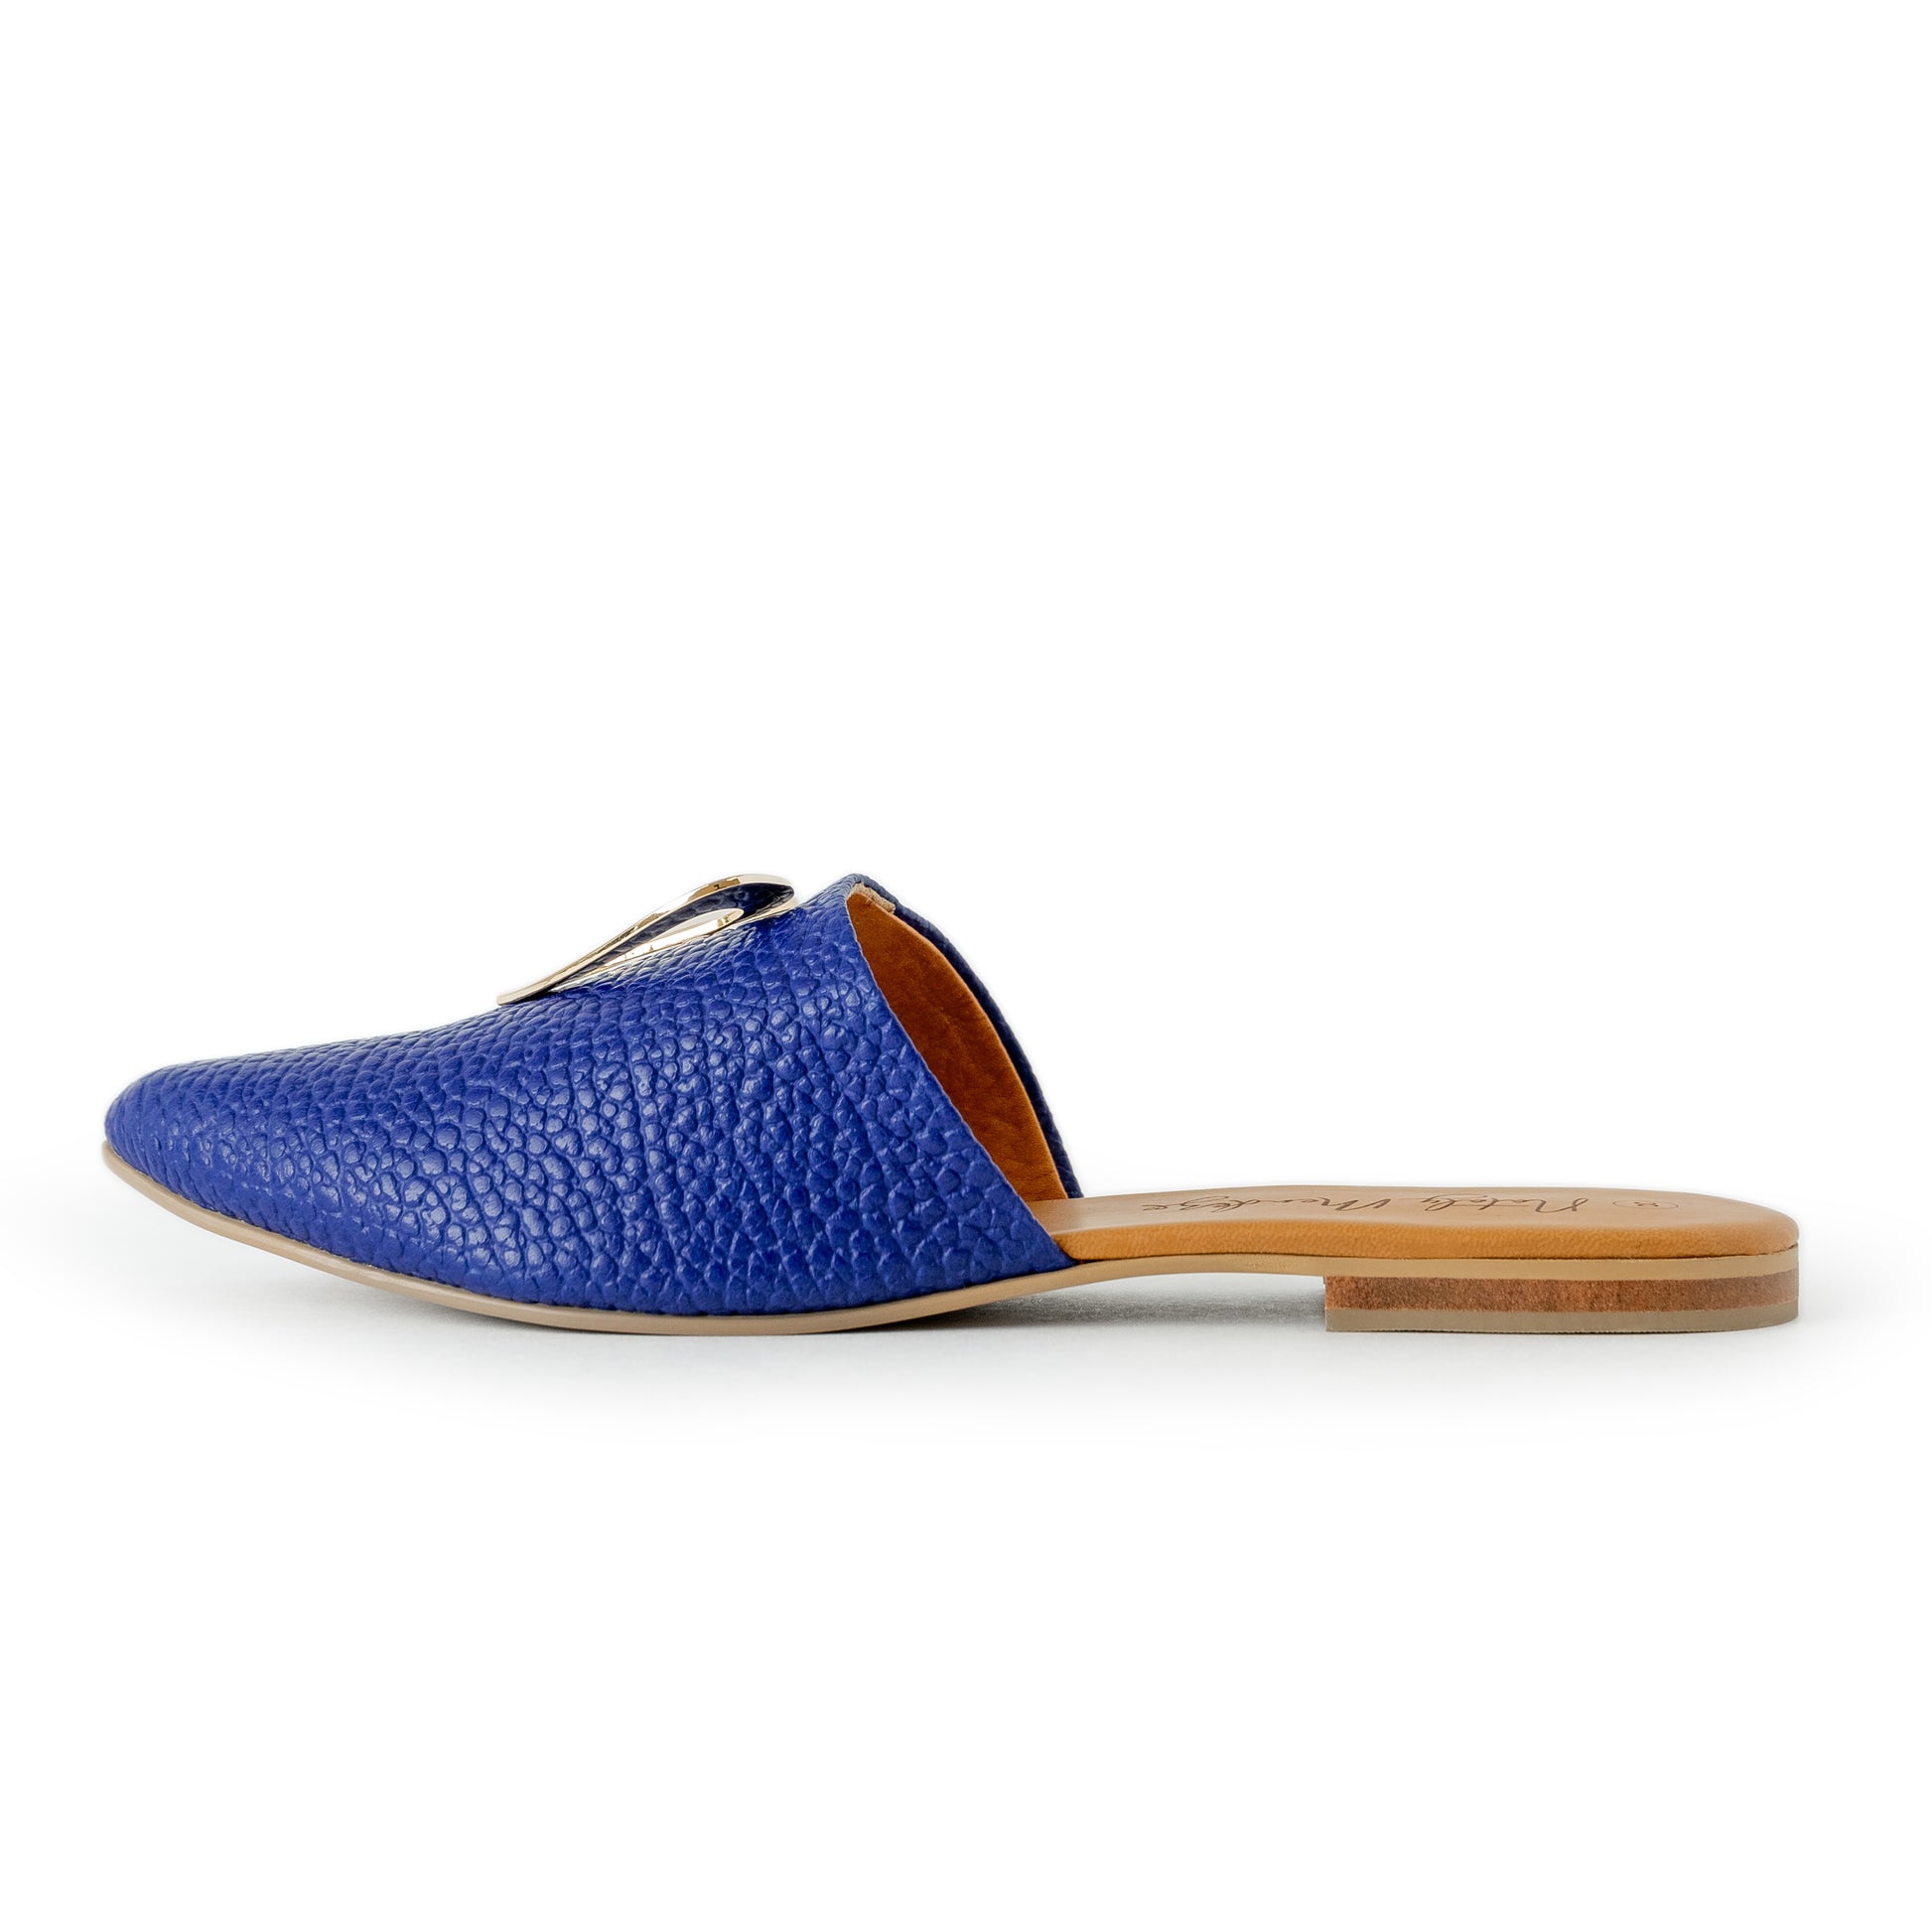 Tina Blue by Nataly Mendez FEATURES Genuine leather  Insole lining made of leather Italian sole Heel height .5 cm Handmade